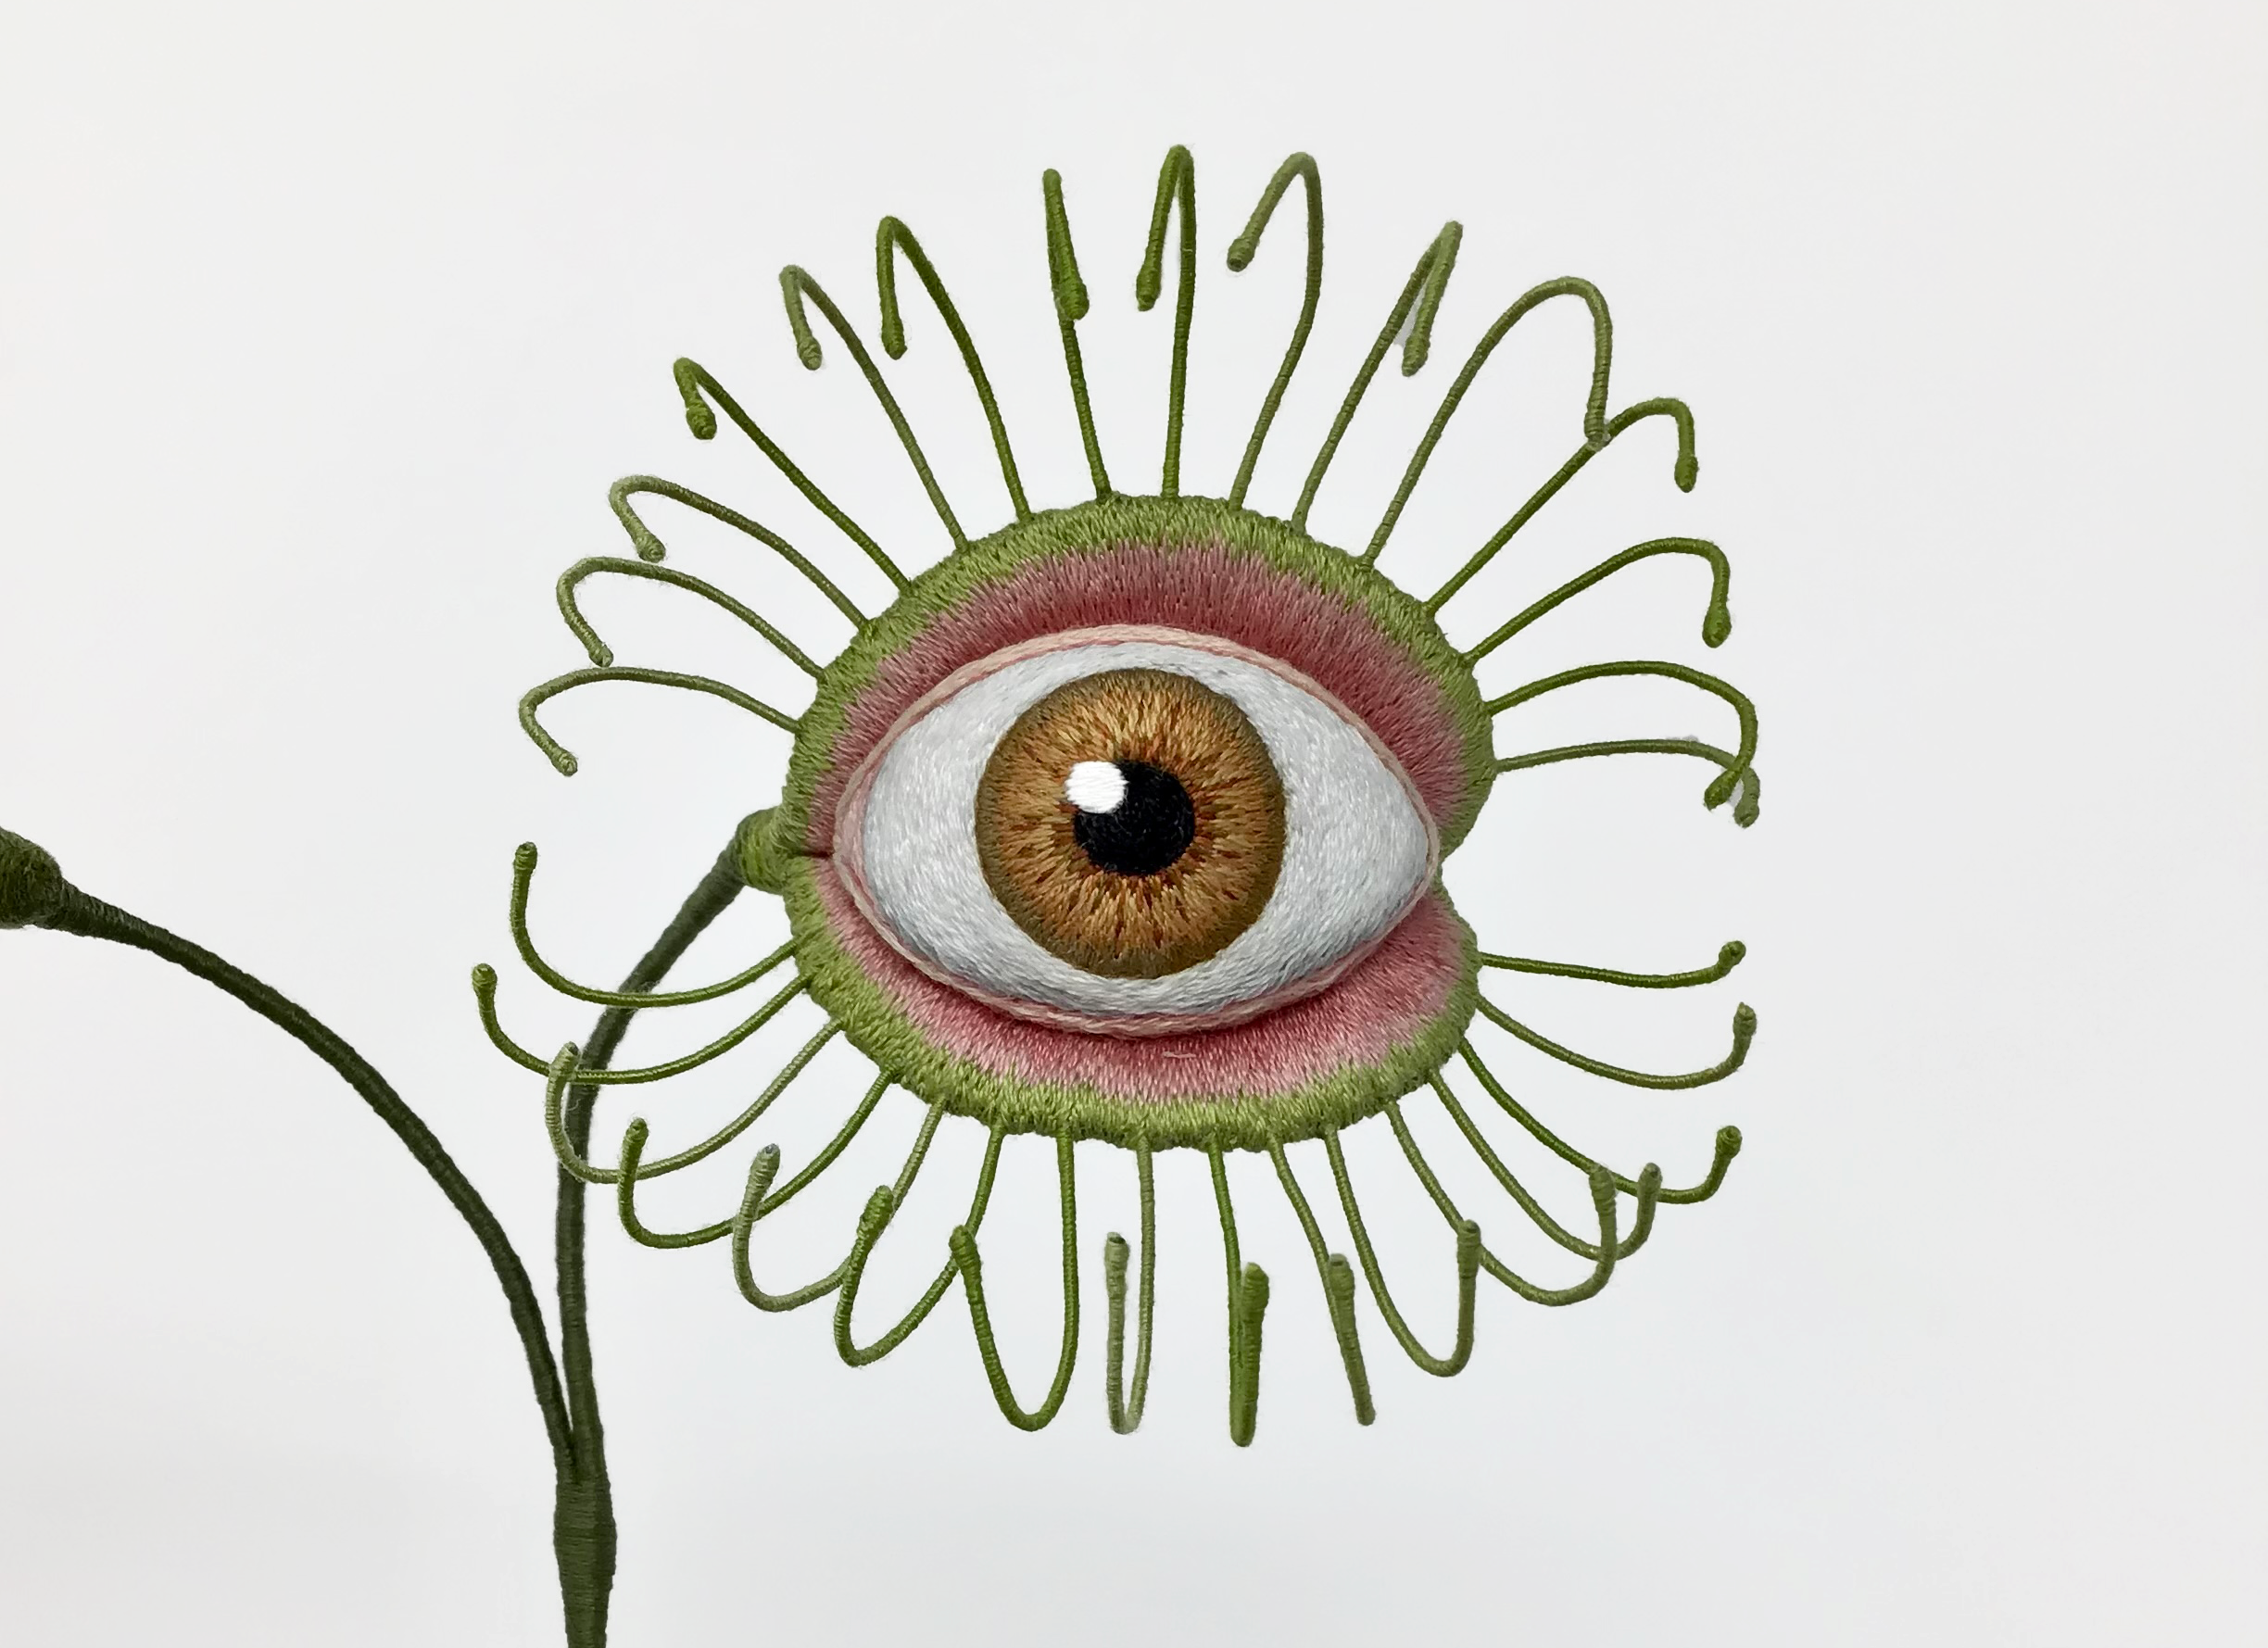 Embroidered soft sculpture of a plant that looks like a venus fly trap, but there is a human eye in the mouth of the plant.